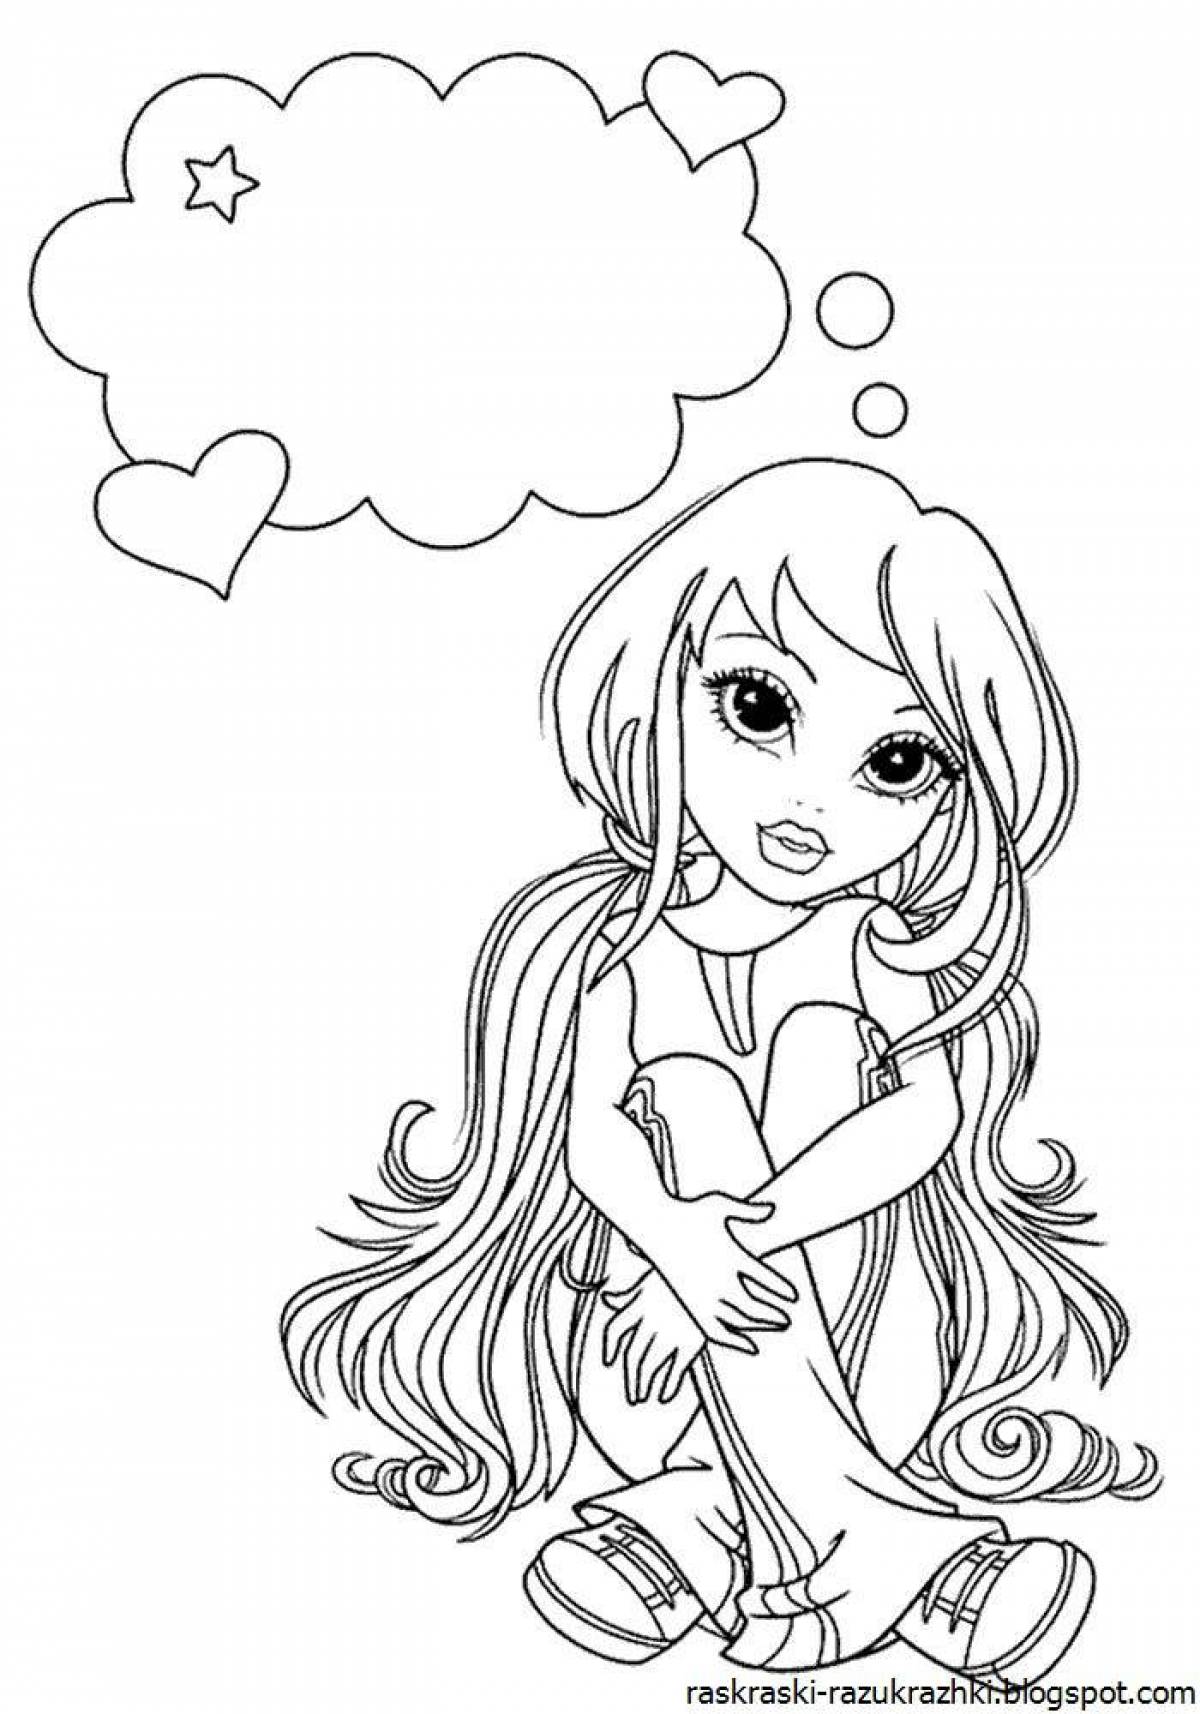 Live coloring drawn page